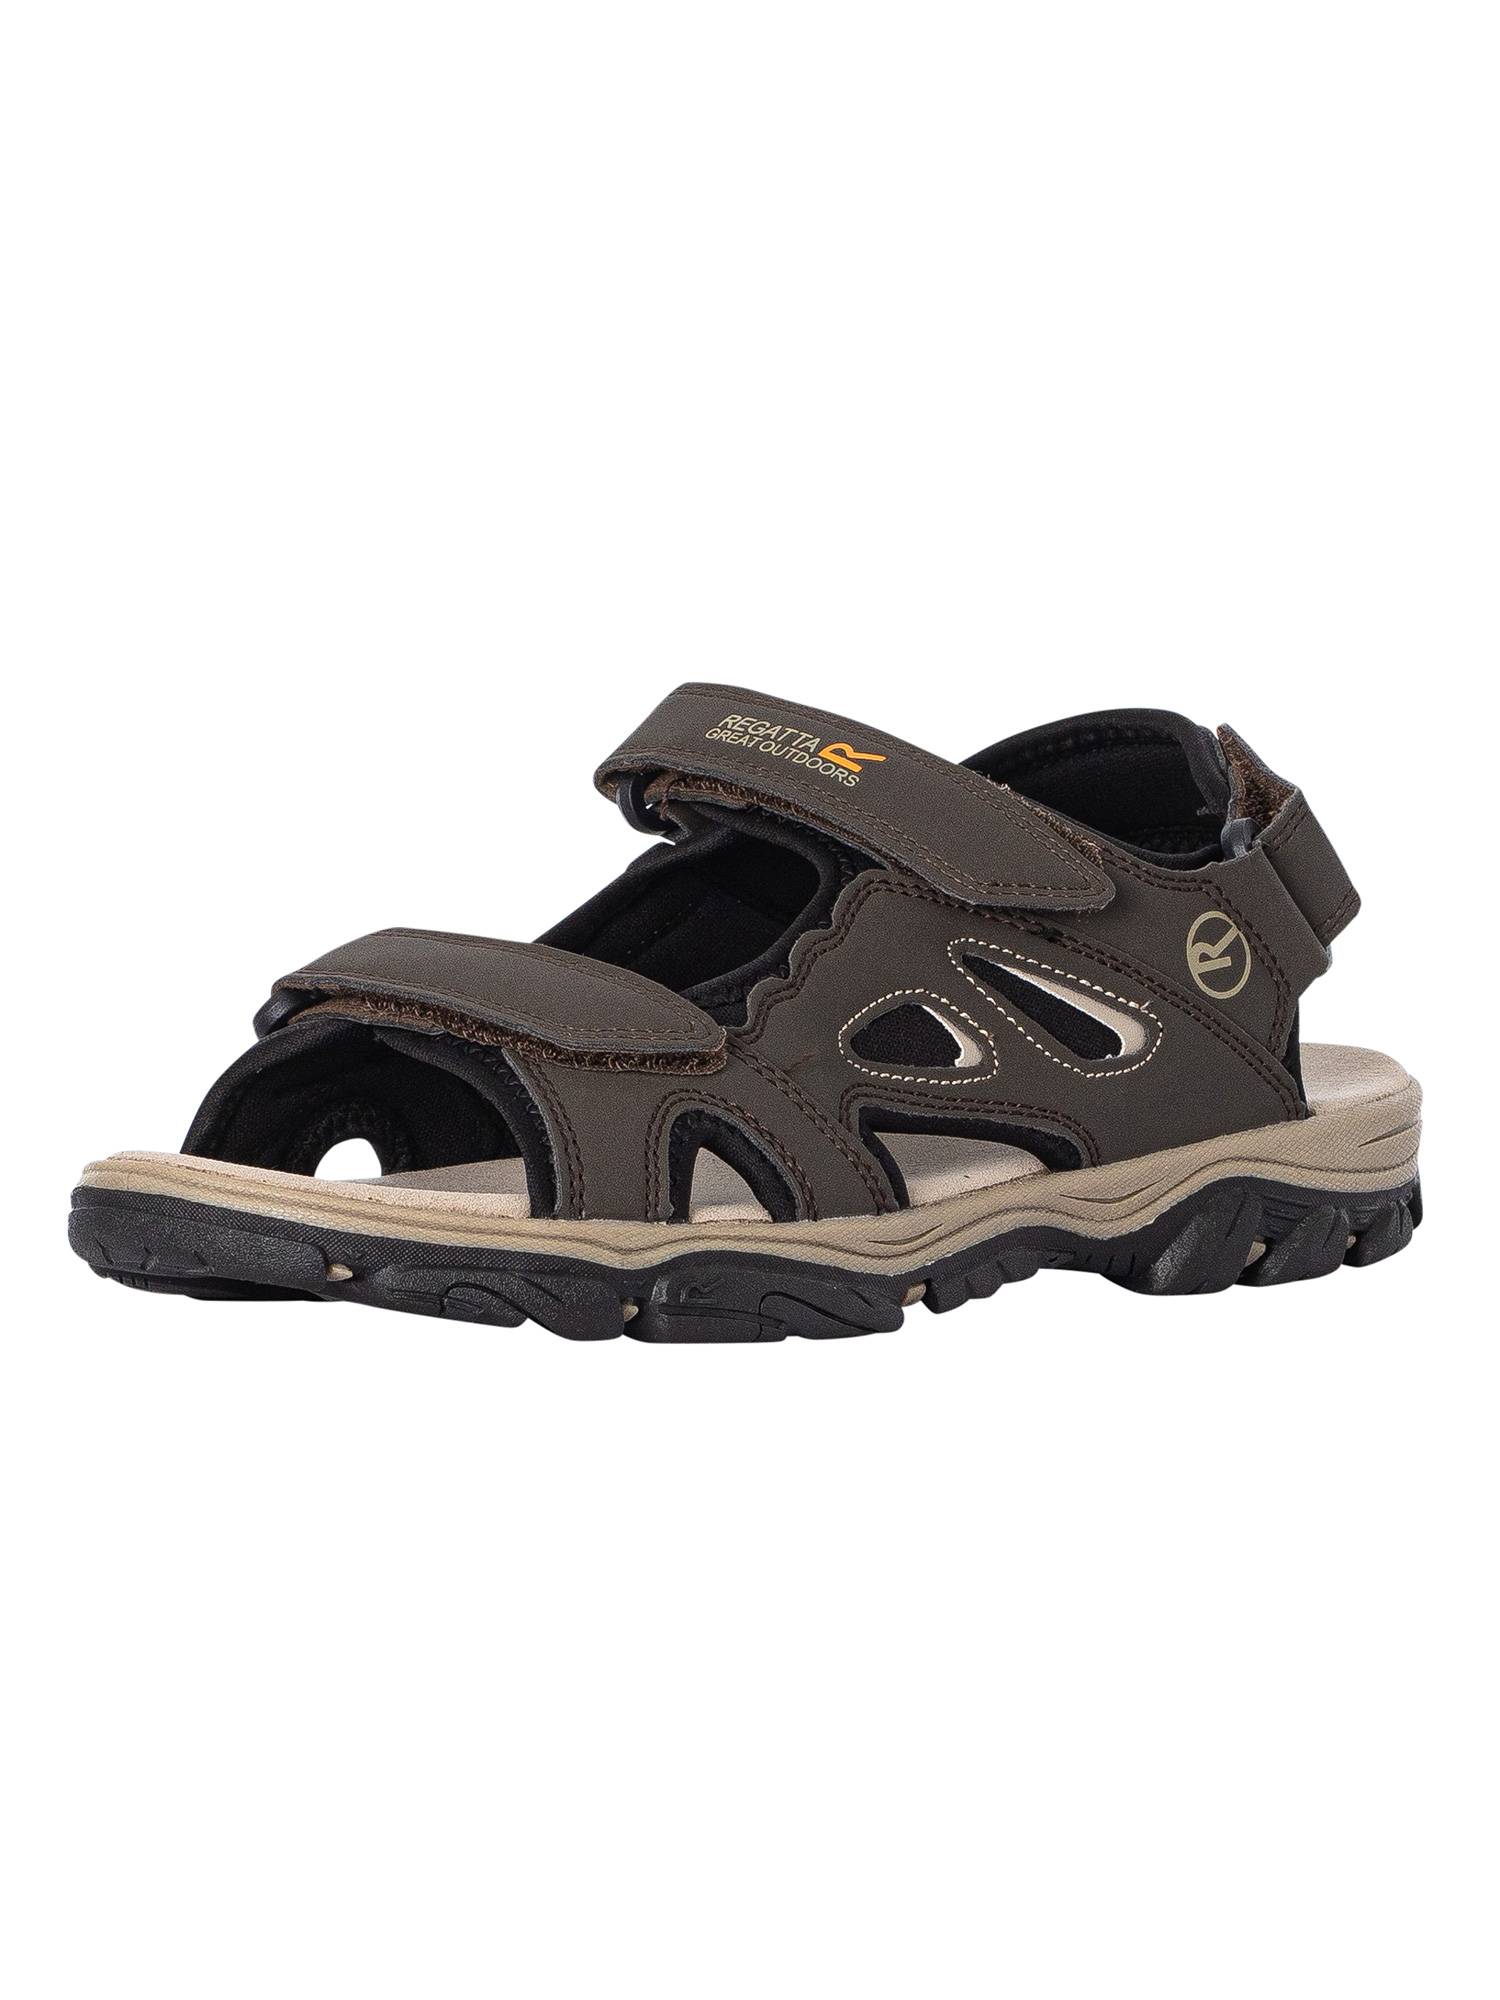 Holcombe Vent Sandals product